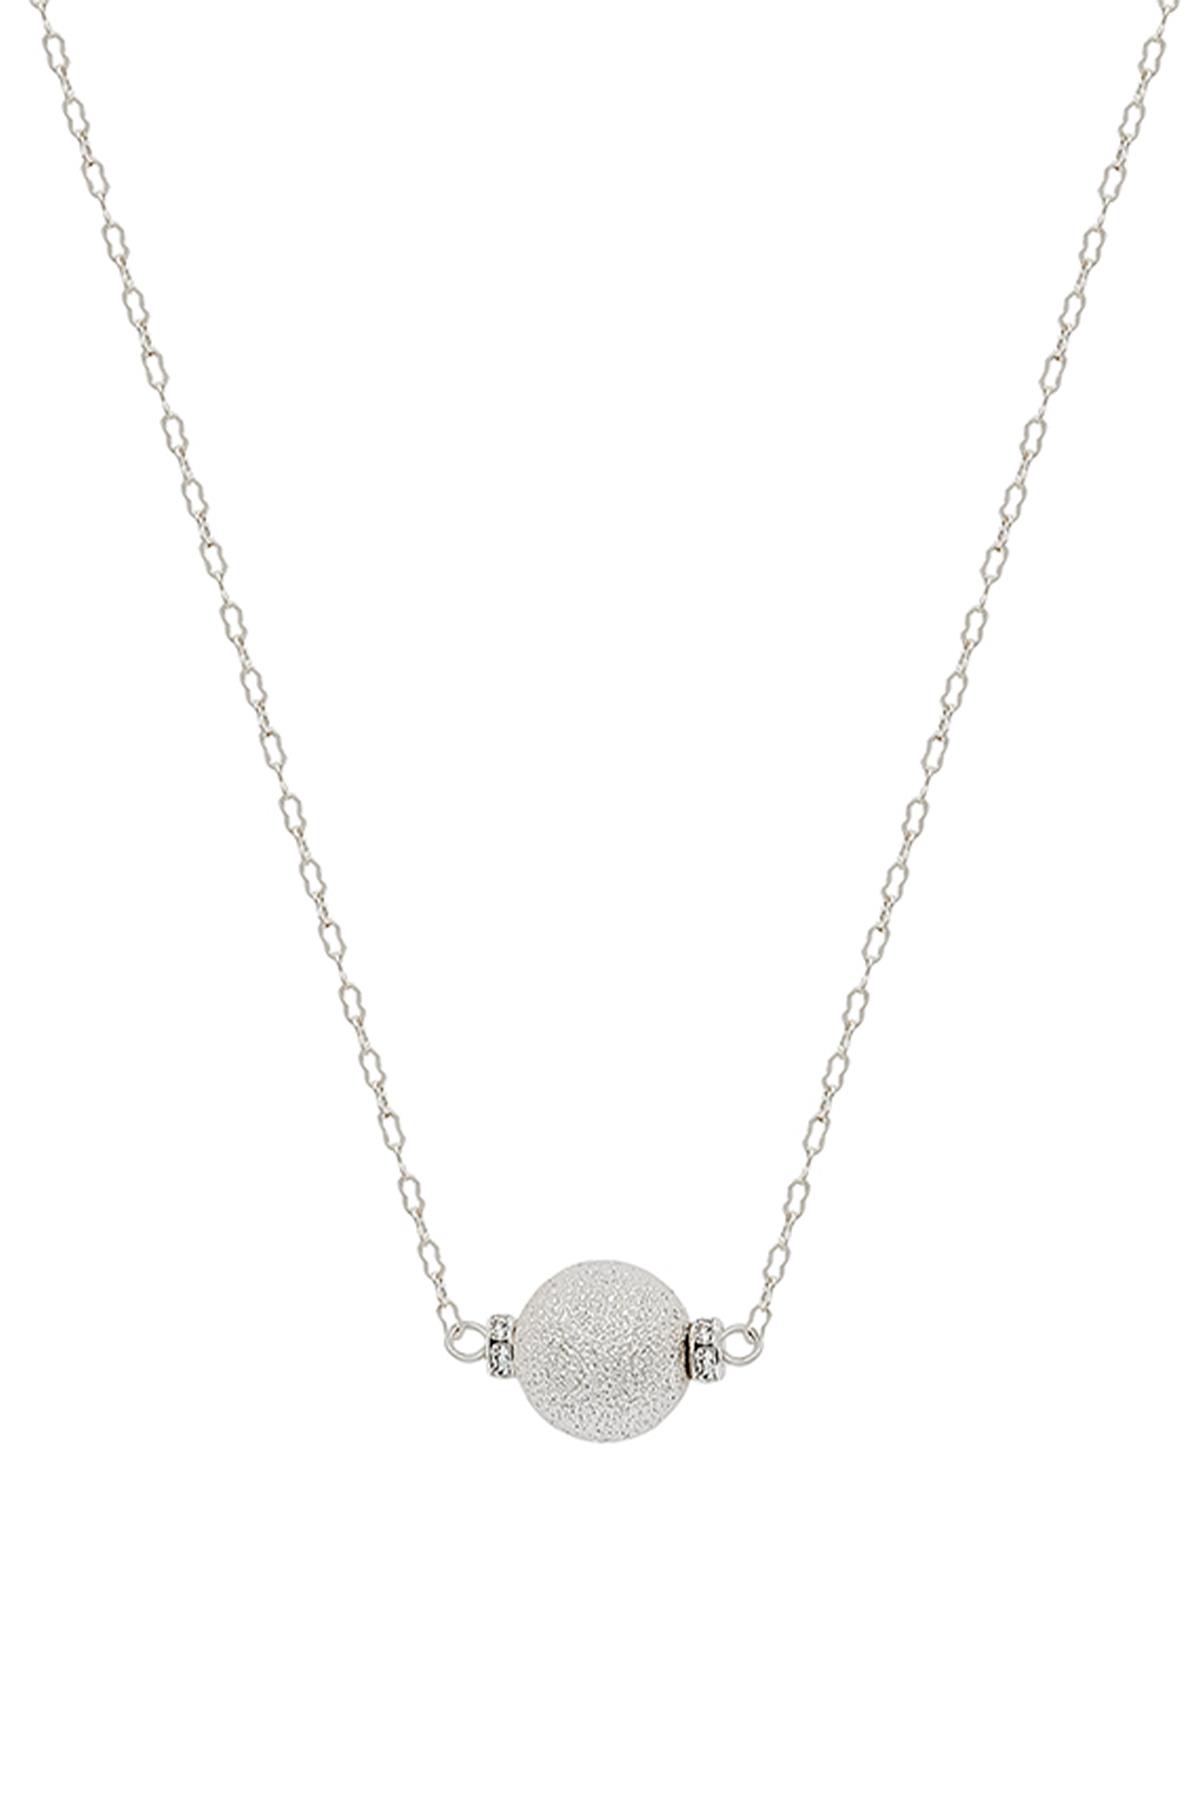 12MM SATIN BALL  W/ PAVE ACCENT SHORT NECKLACE